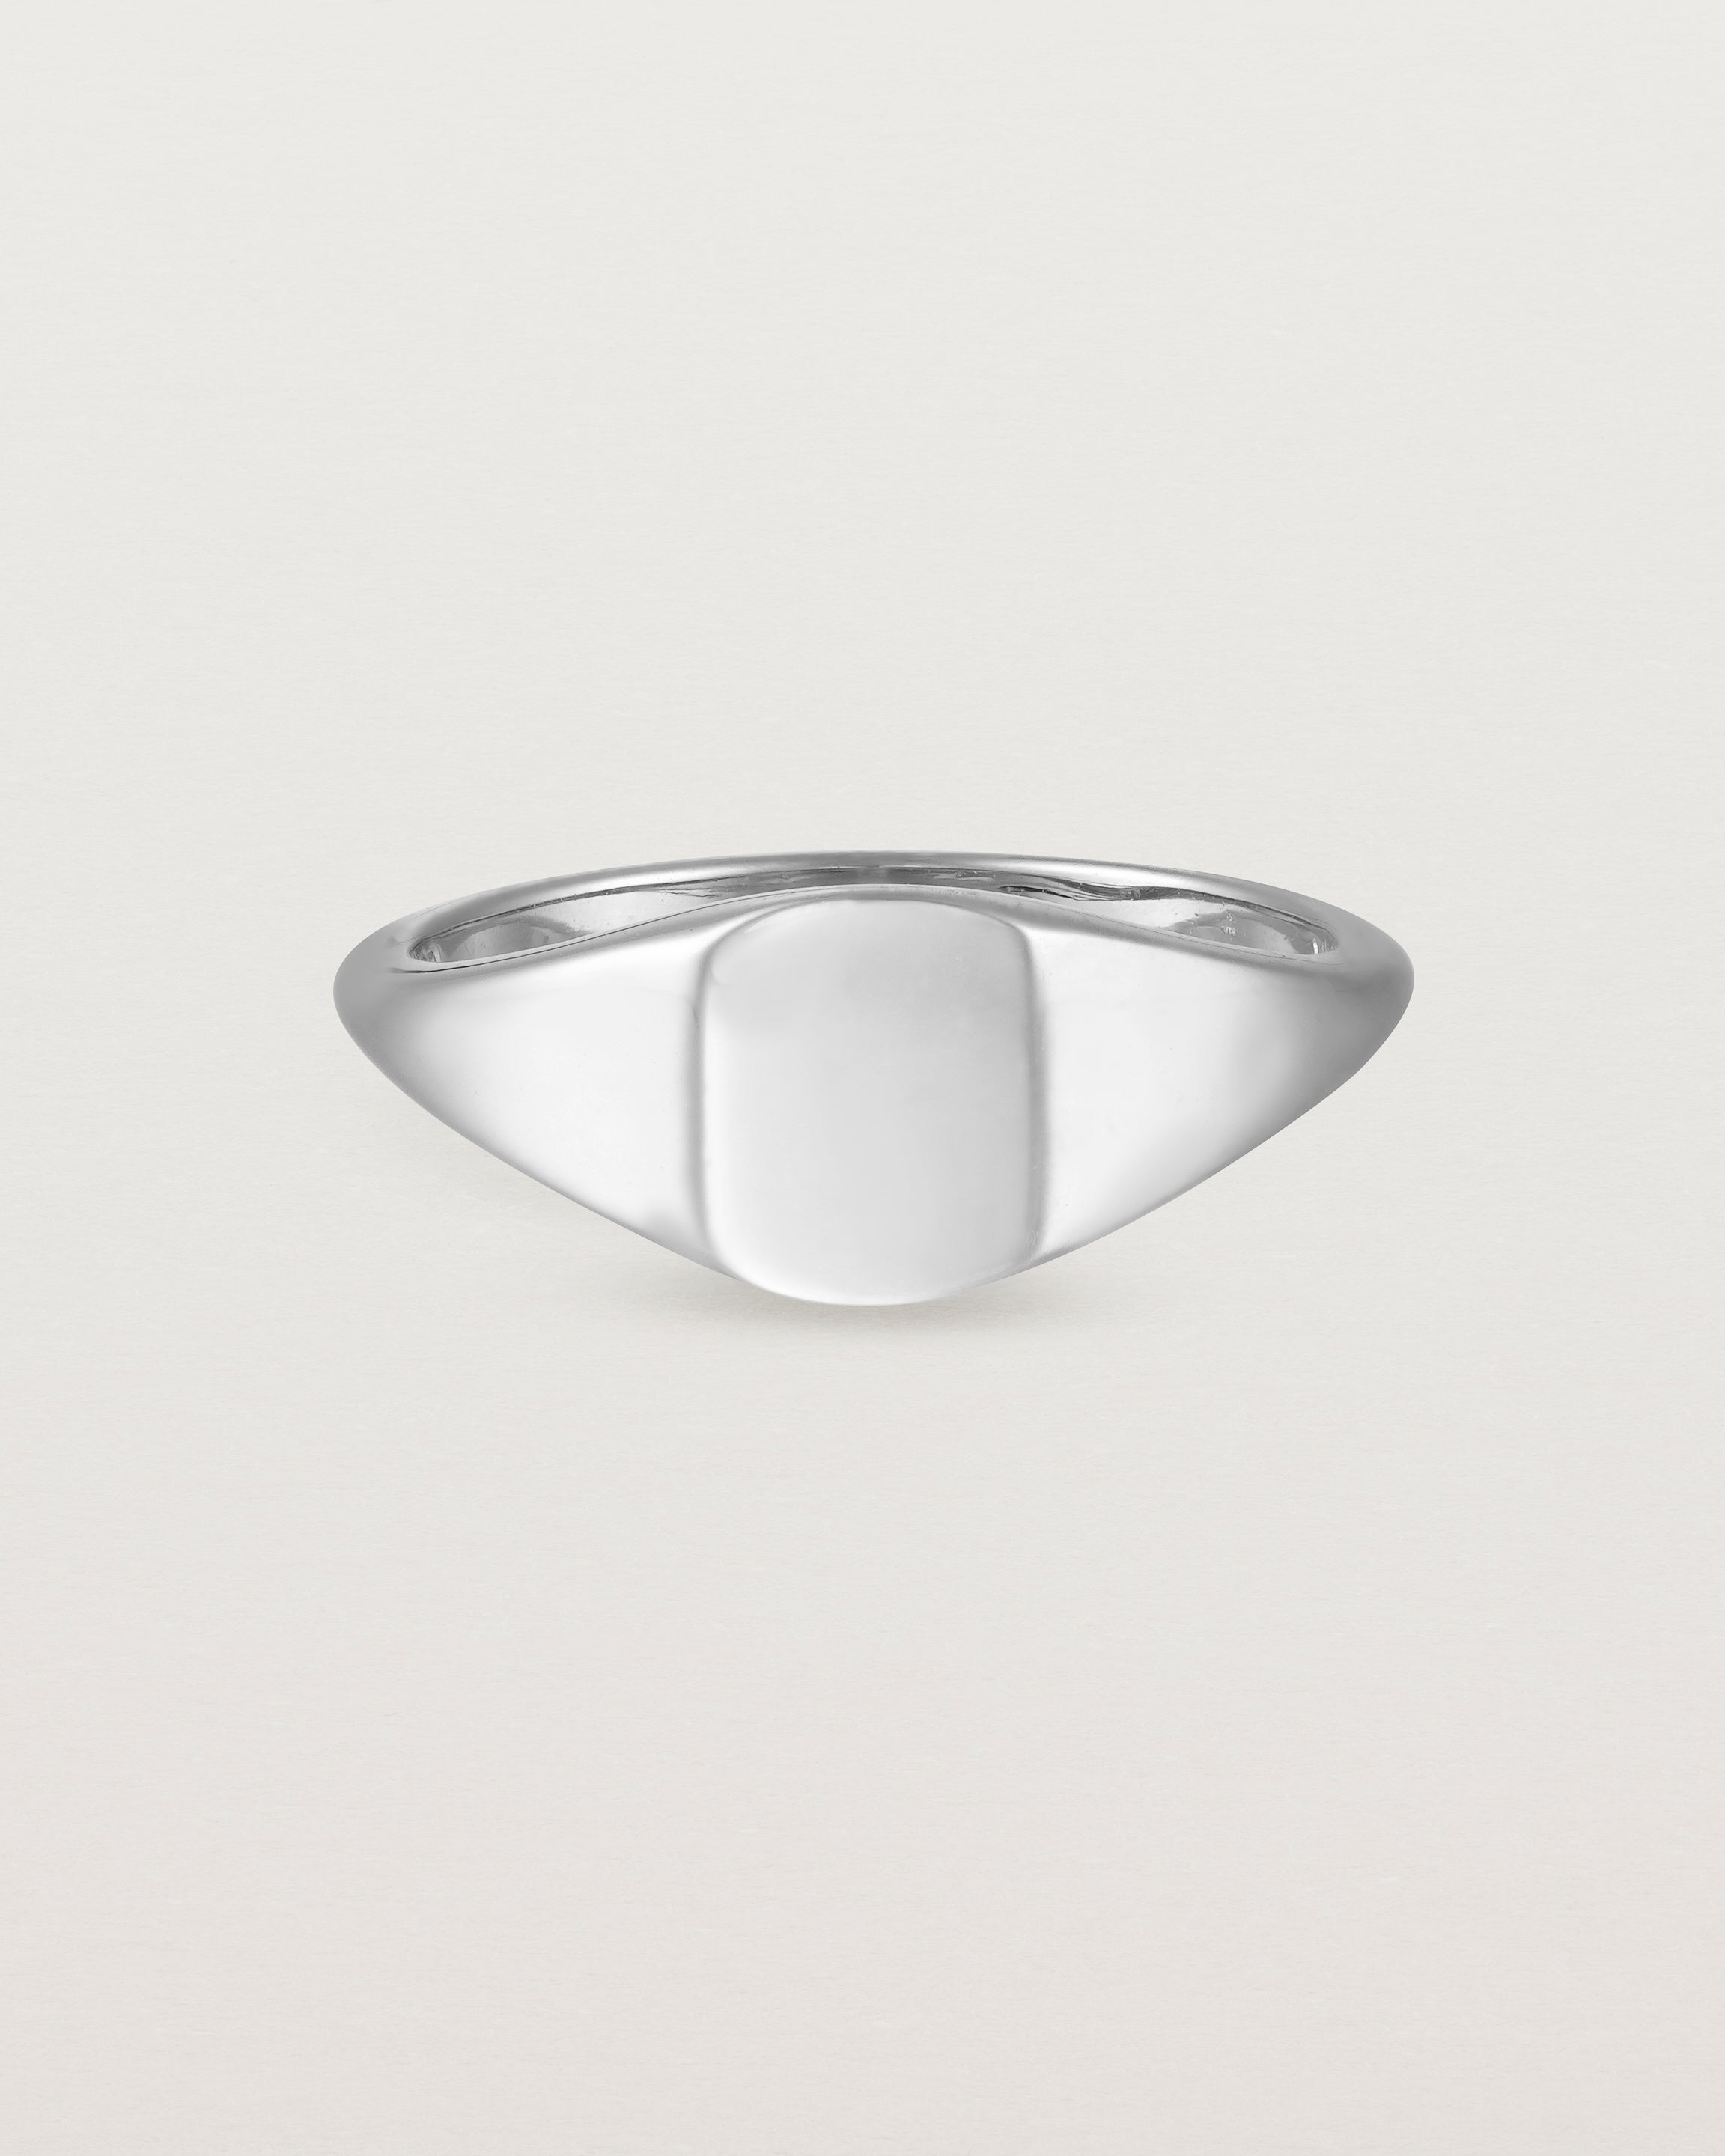 Front view of a simple signet with an elongated rectangular face in sterling silver.